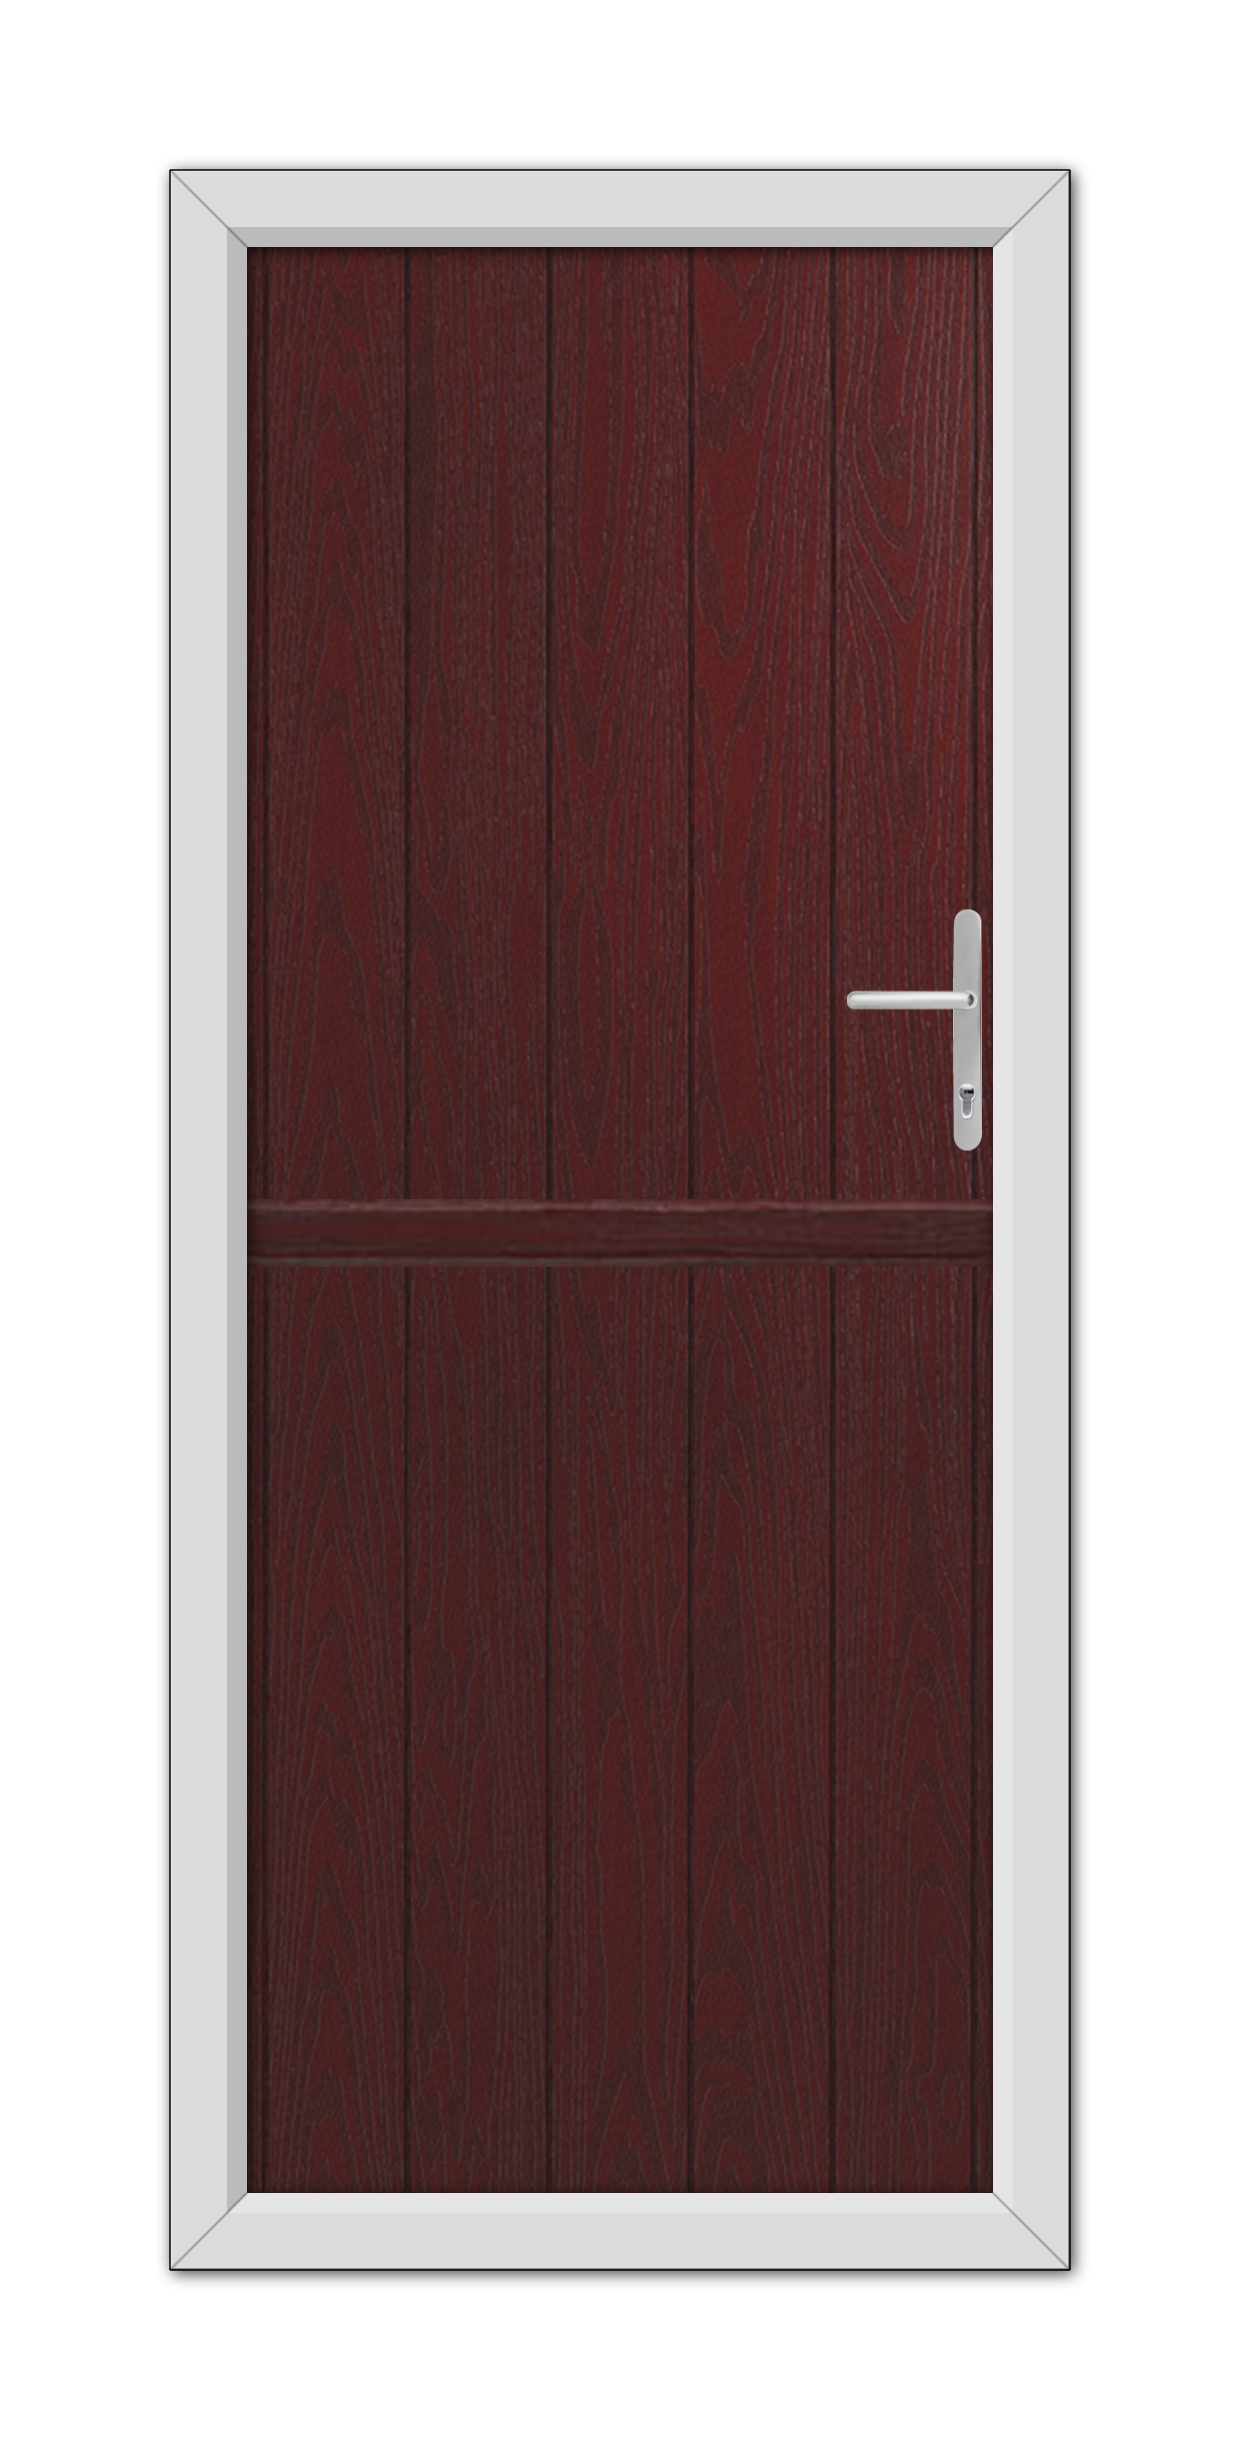 A modern closed Rosewood Gloucester Stable Composite Door 48mm Timber Core with a white handle, set within a grey frame.